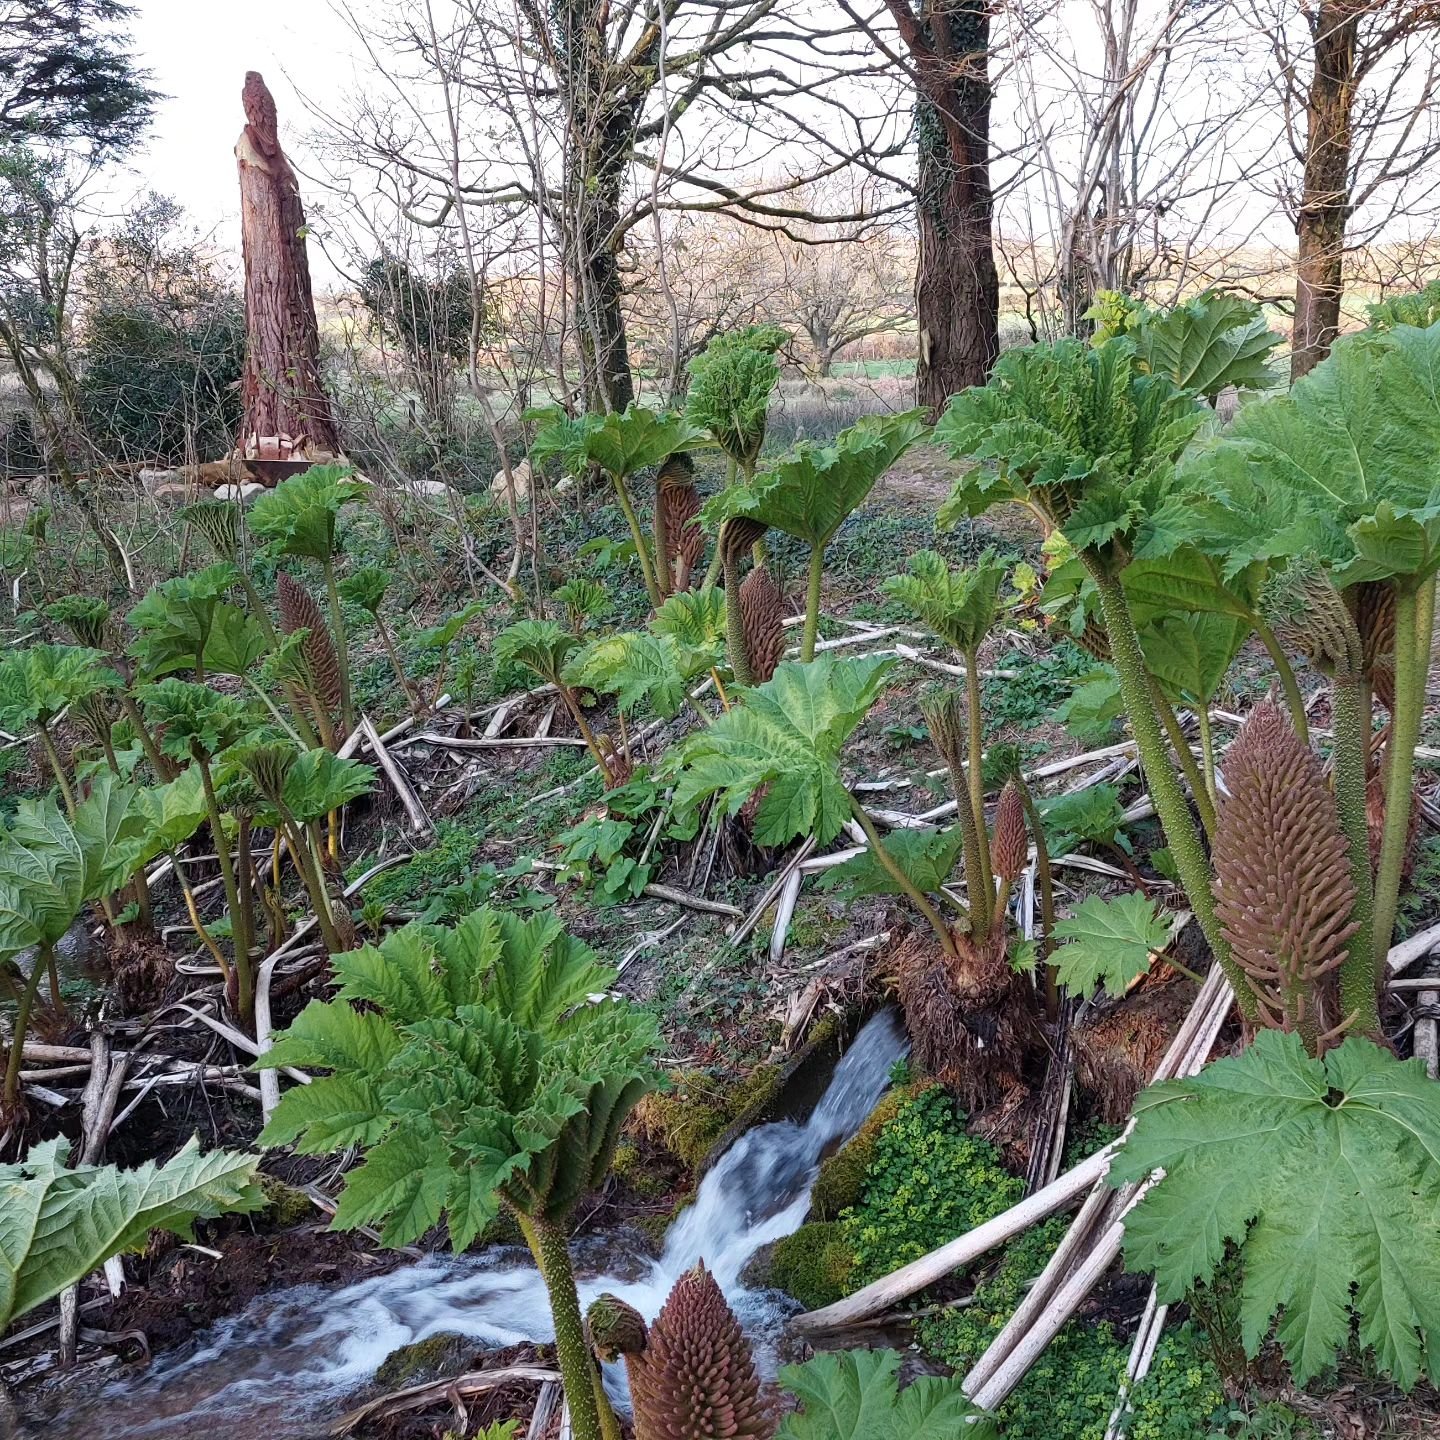 Amazing gunnera and so much water in the stream!  Come and enjoy the lushness of Lukesland on Suns, Weds and Bank Hols 11am to 5pm till 9th June. Full details at www.lukesland.co.uk